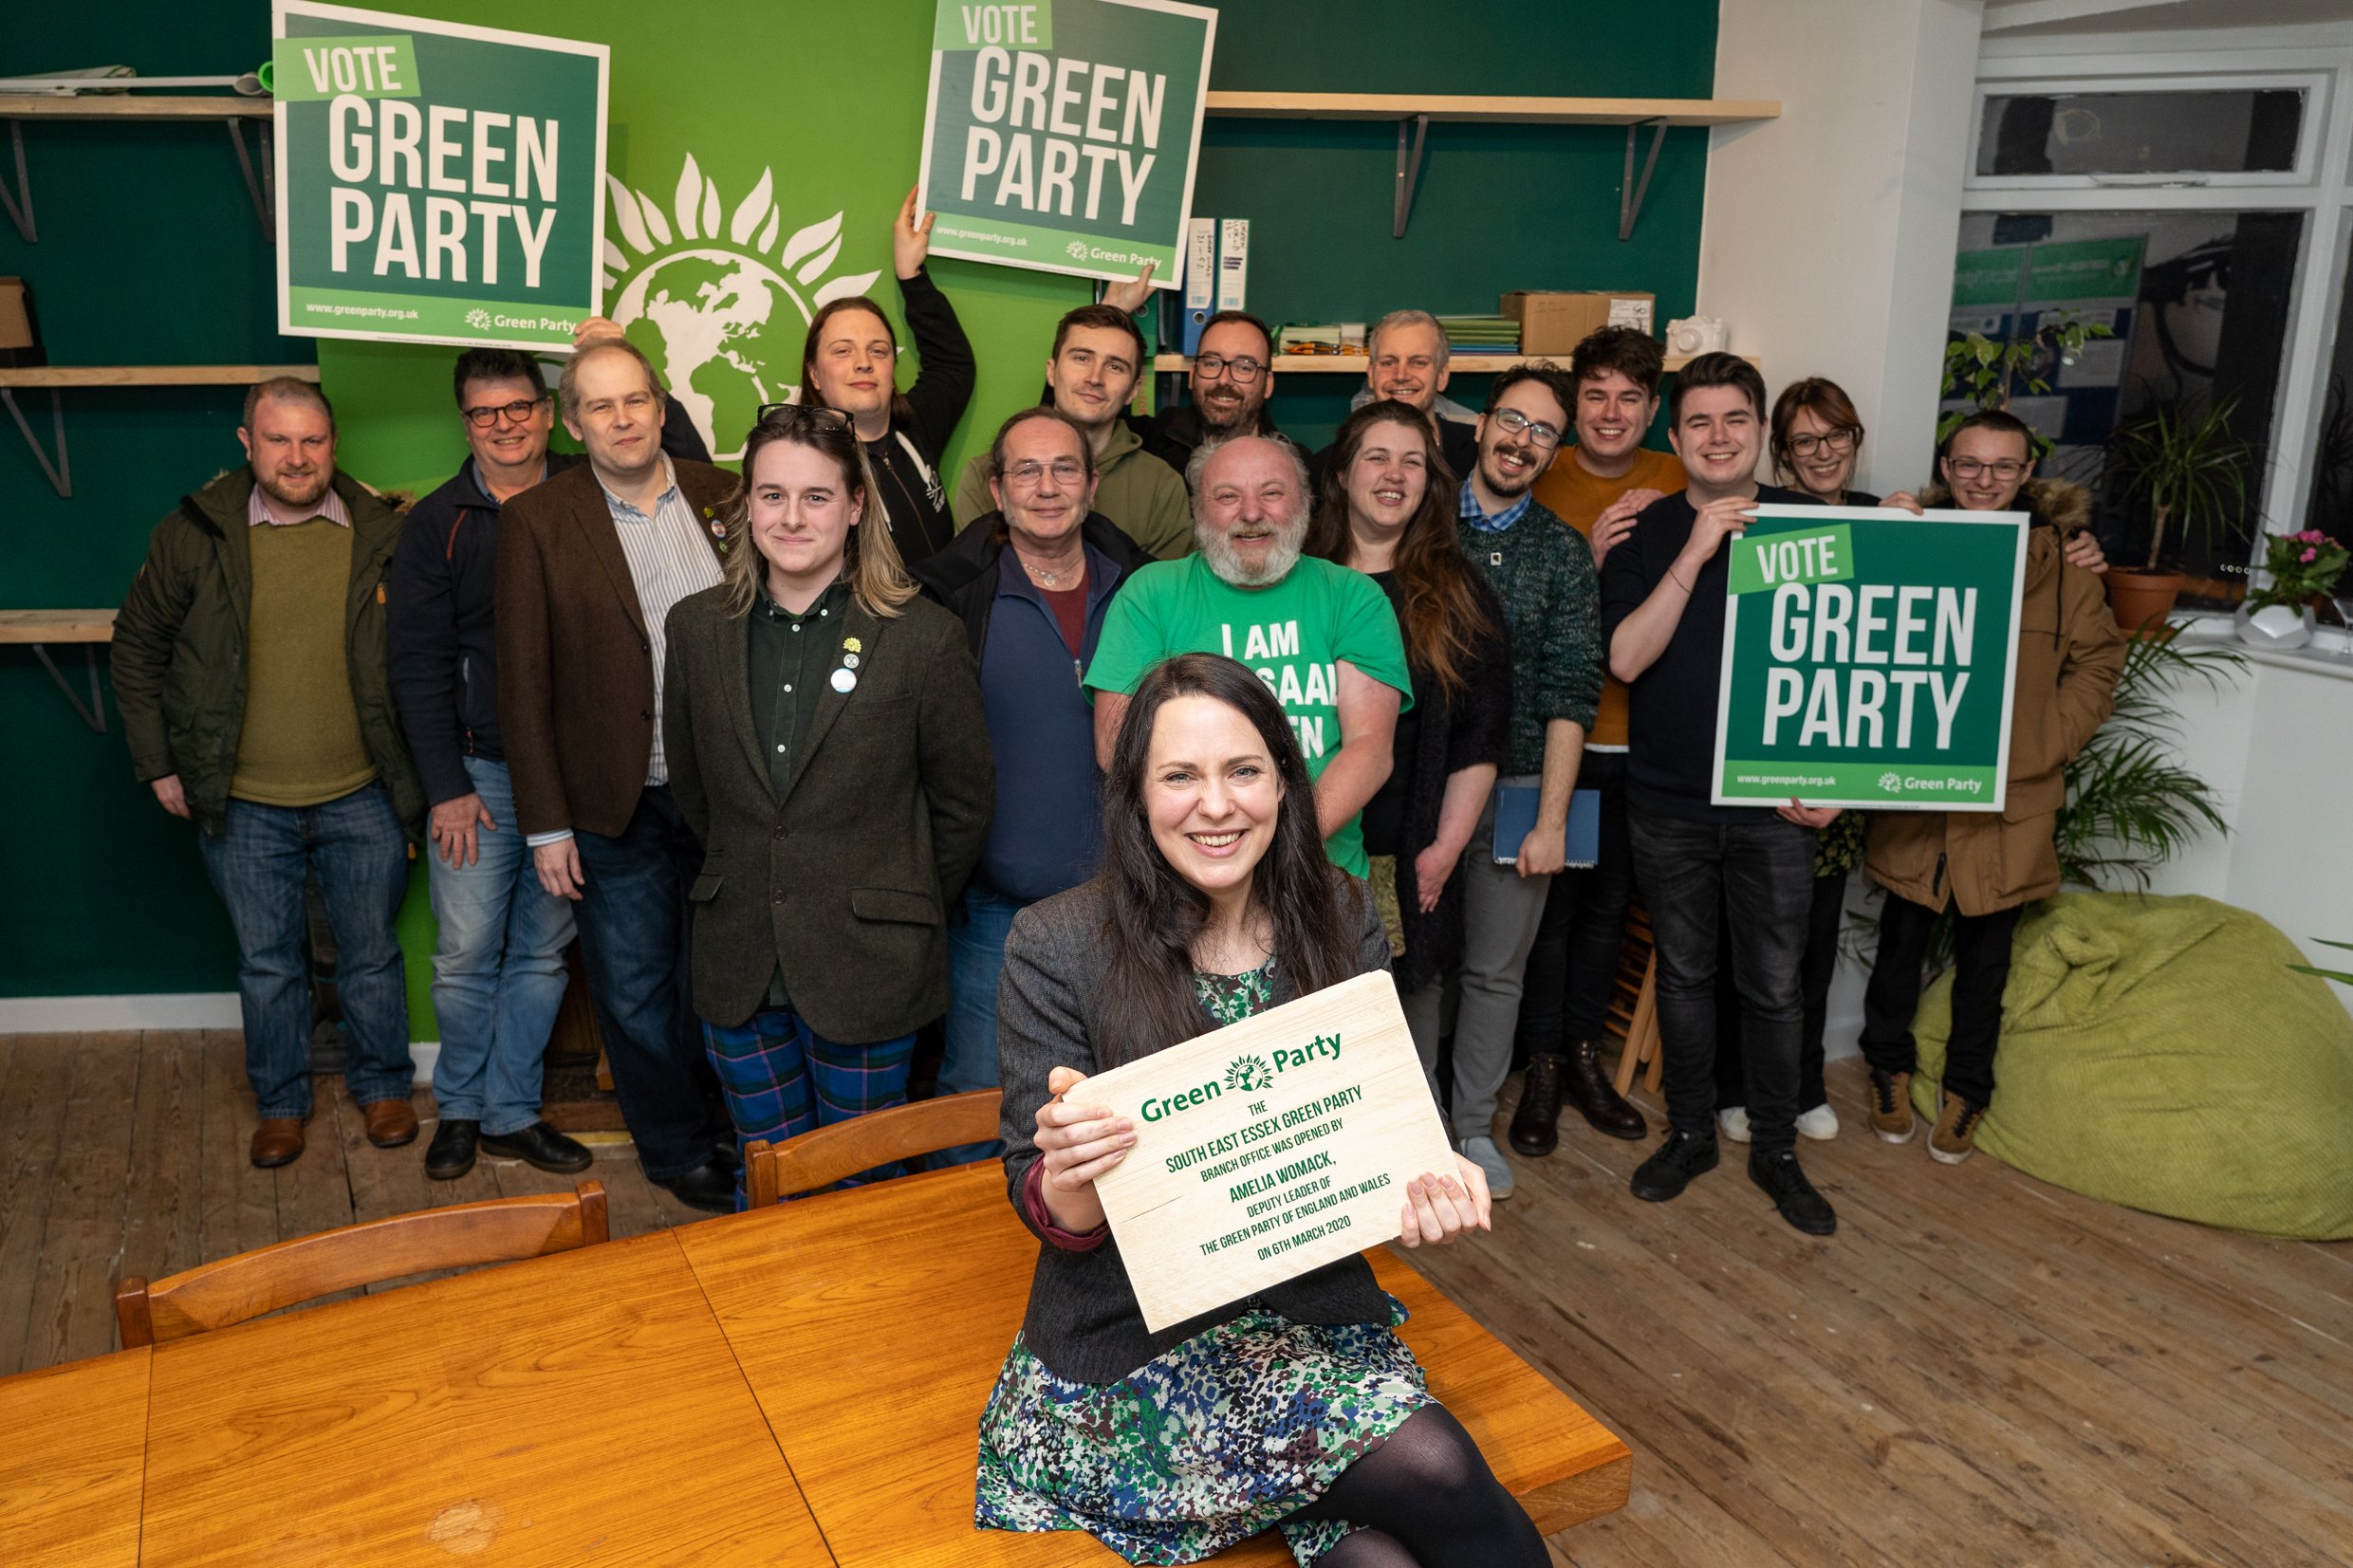 AMELIA WOMACK OPENING THE NEW gREEN pARTY OFFICE AT THE rAILWAY, sOUTHEND. Green Party Fundraiser at the Railway Southend with green economy stalls, guest speakers BENALI HAMDACHE and AMELIA WOMACK (deputy leader of the Green Party) and live bands.